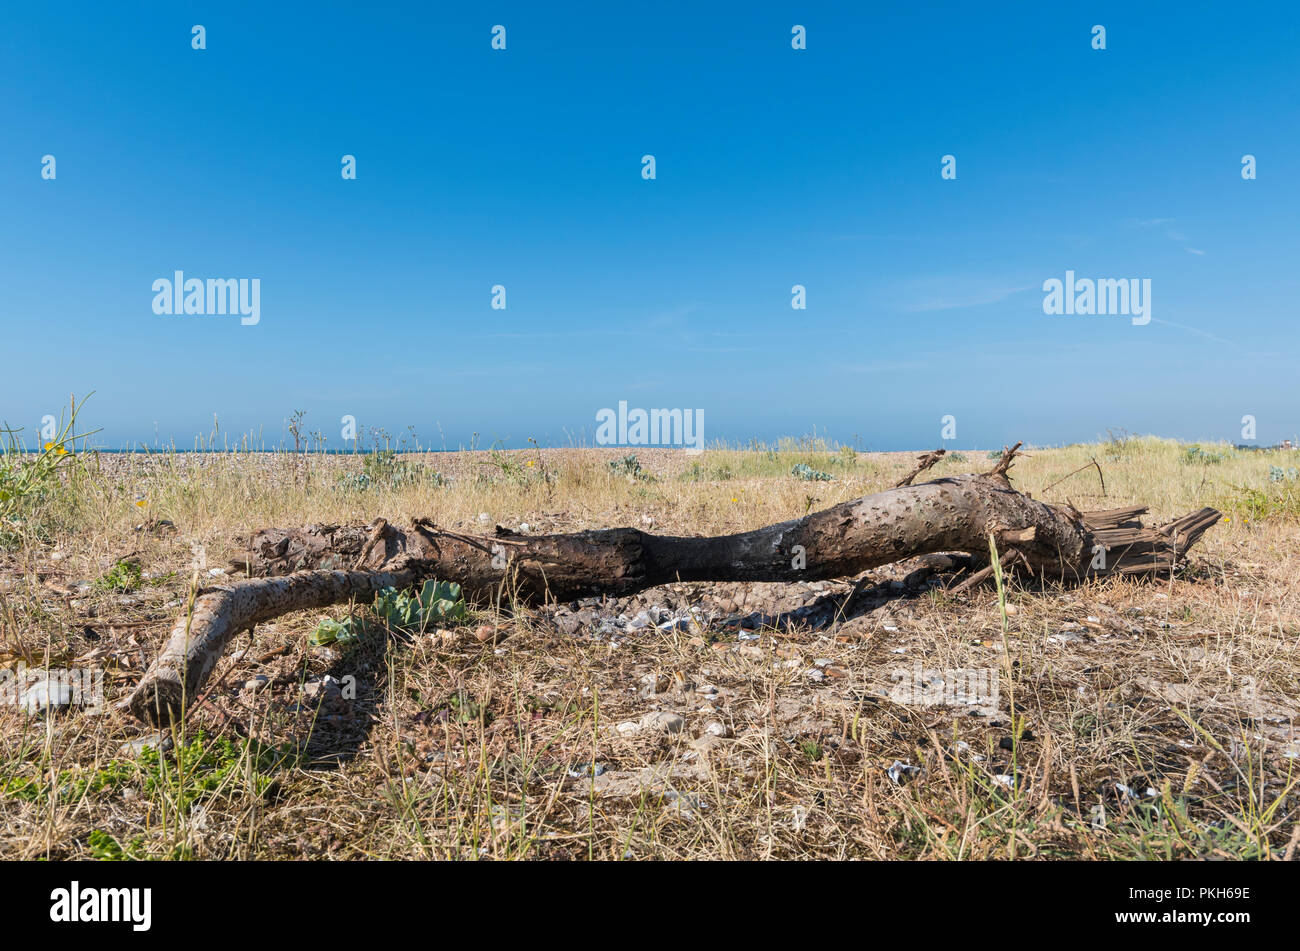 Driftwood washed up on a beach in the UK. Tree trunk on a beach. Stock Photo